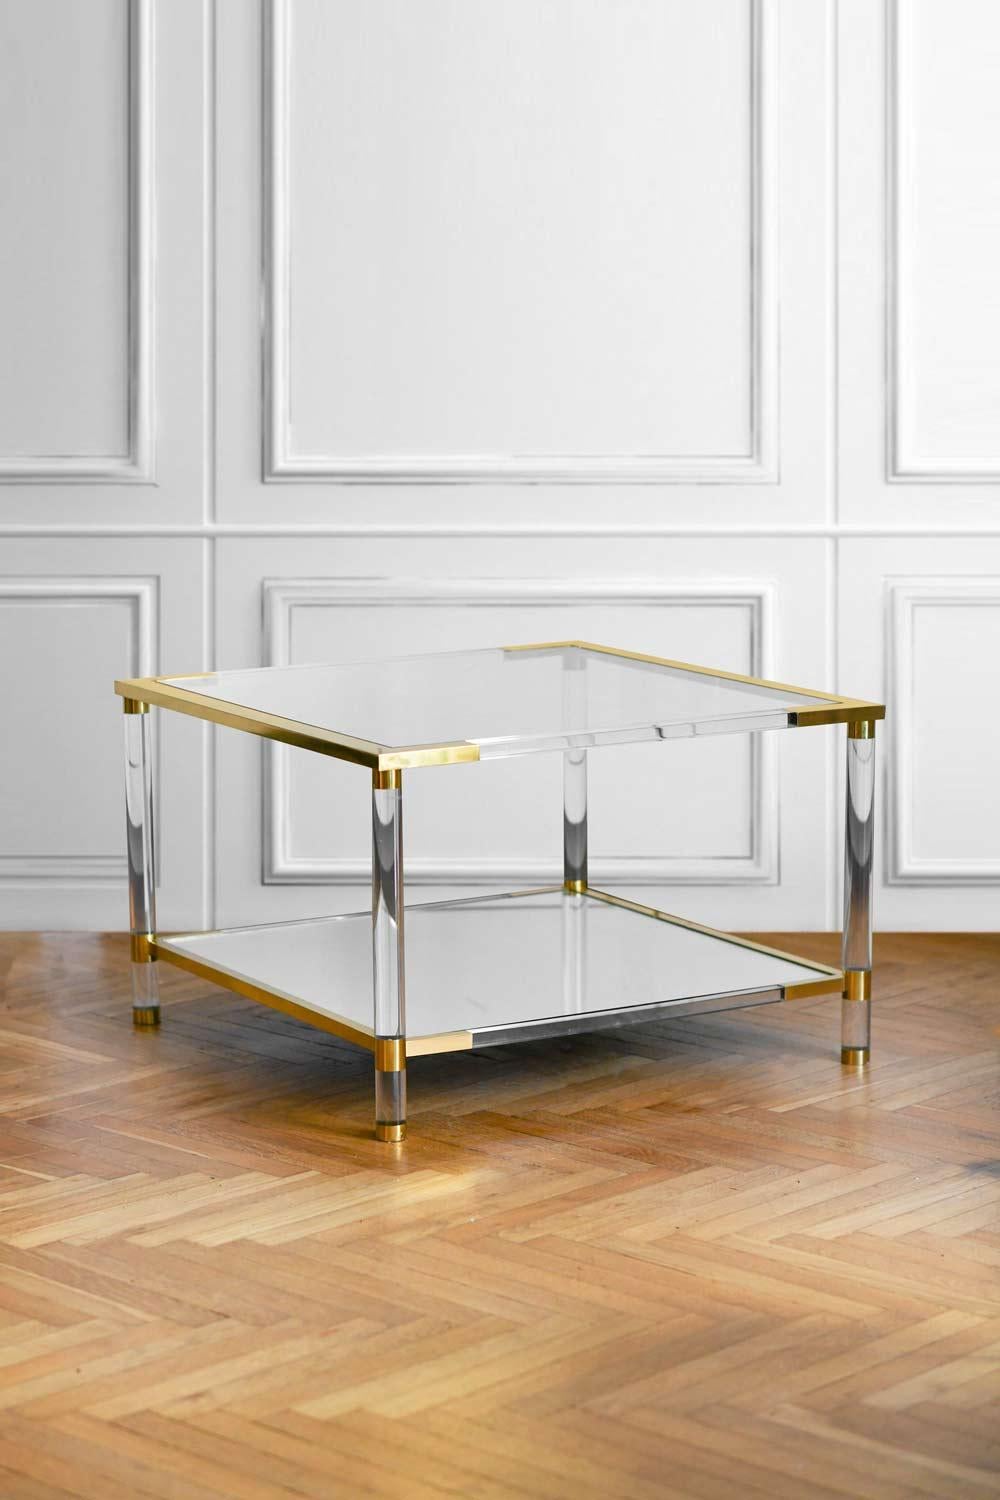 Coffee table in glass, mirrored glass, methacrylate and brass. 
Italian production, 1970s
Product details
Dimensions: 79 W x 50 H x 79 D cm